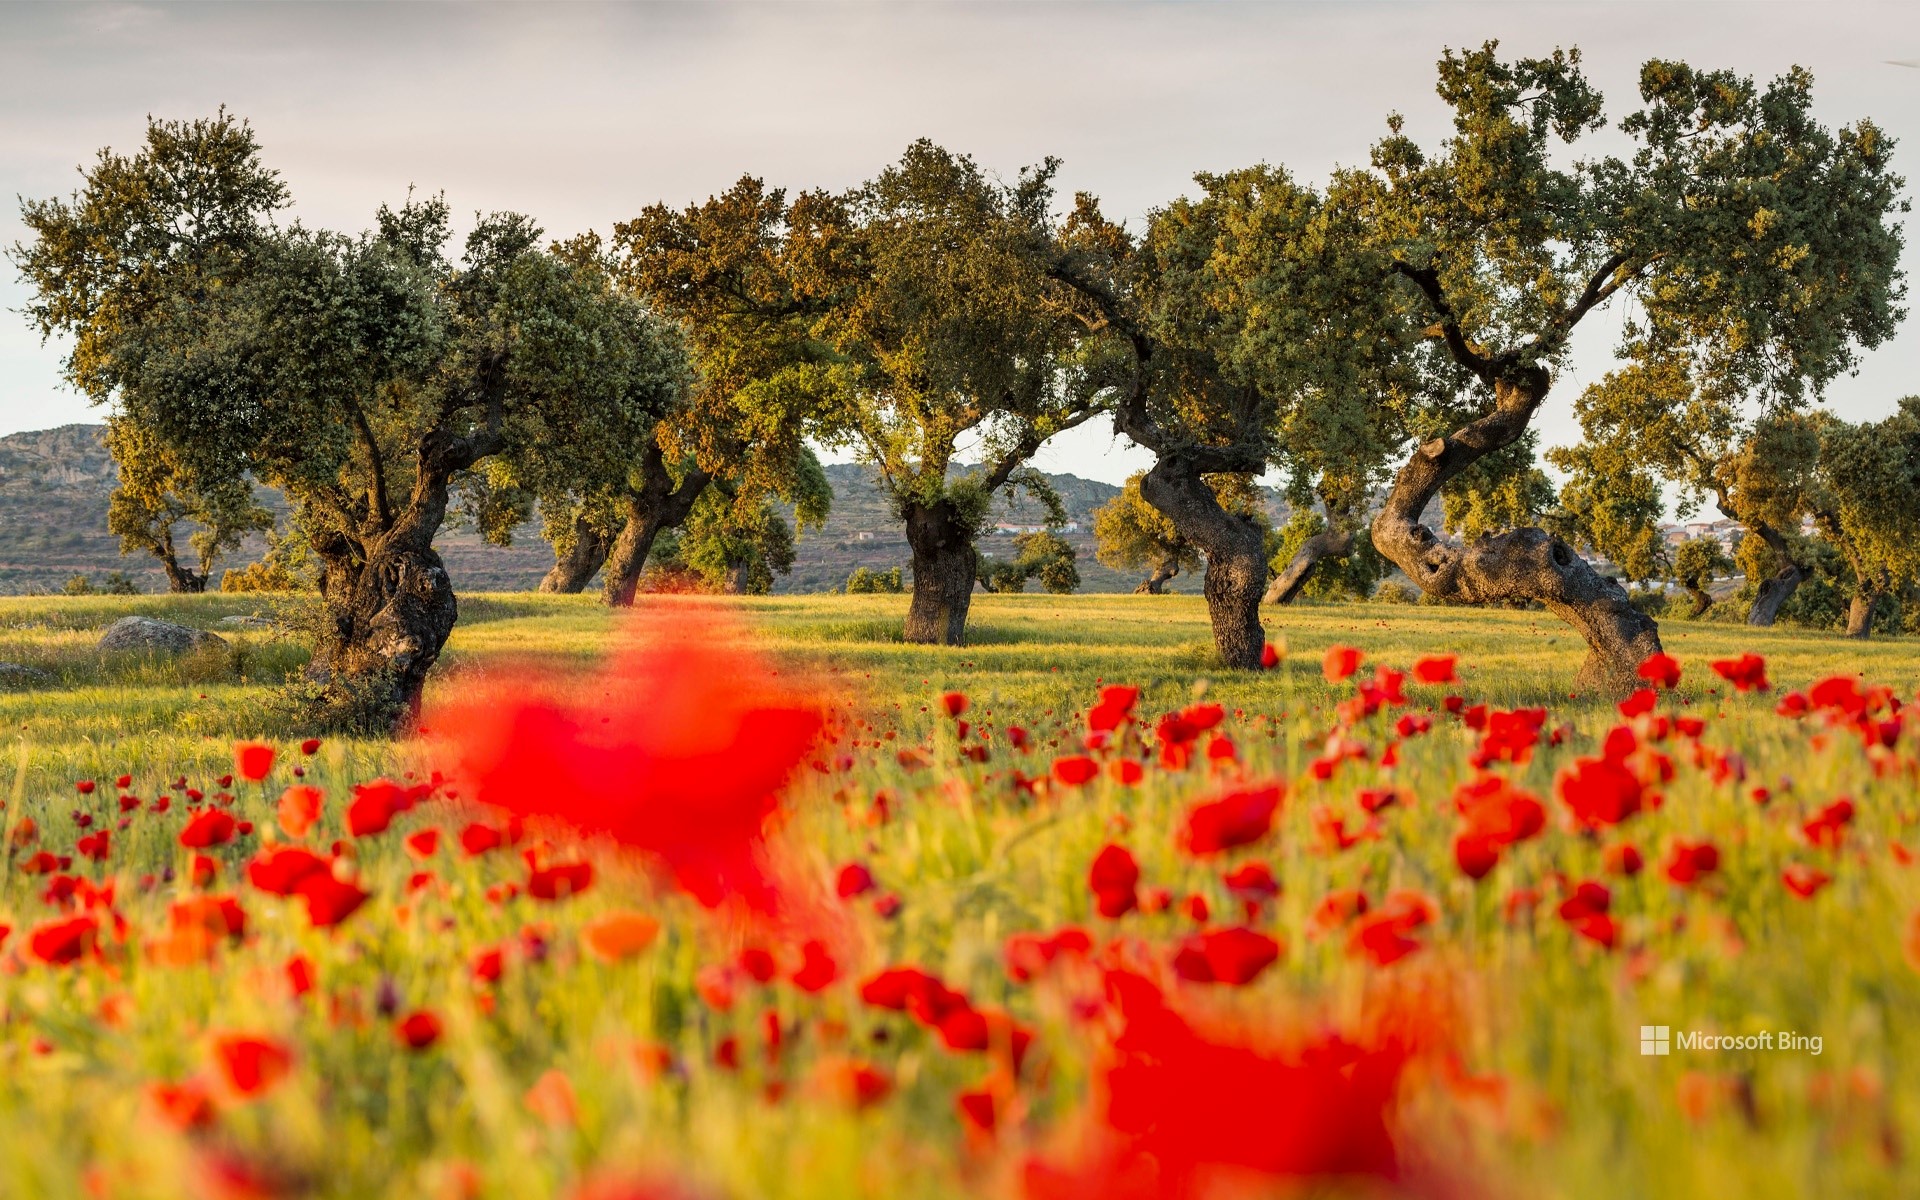 Holm oaks and poppies in the meadow, La Serena, Badajoz, Spain